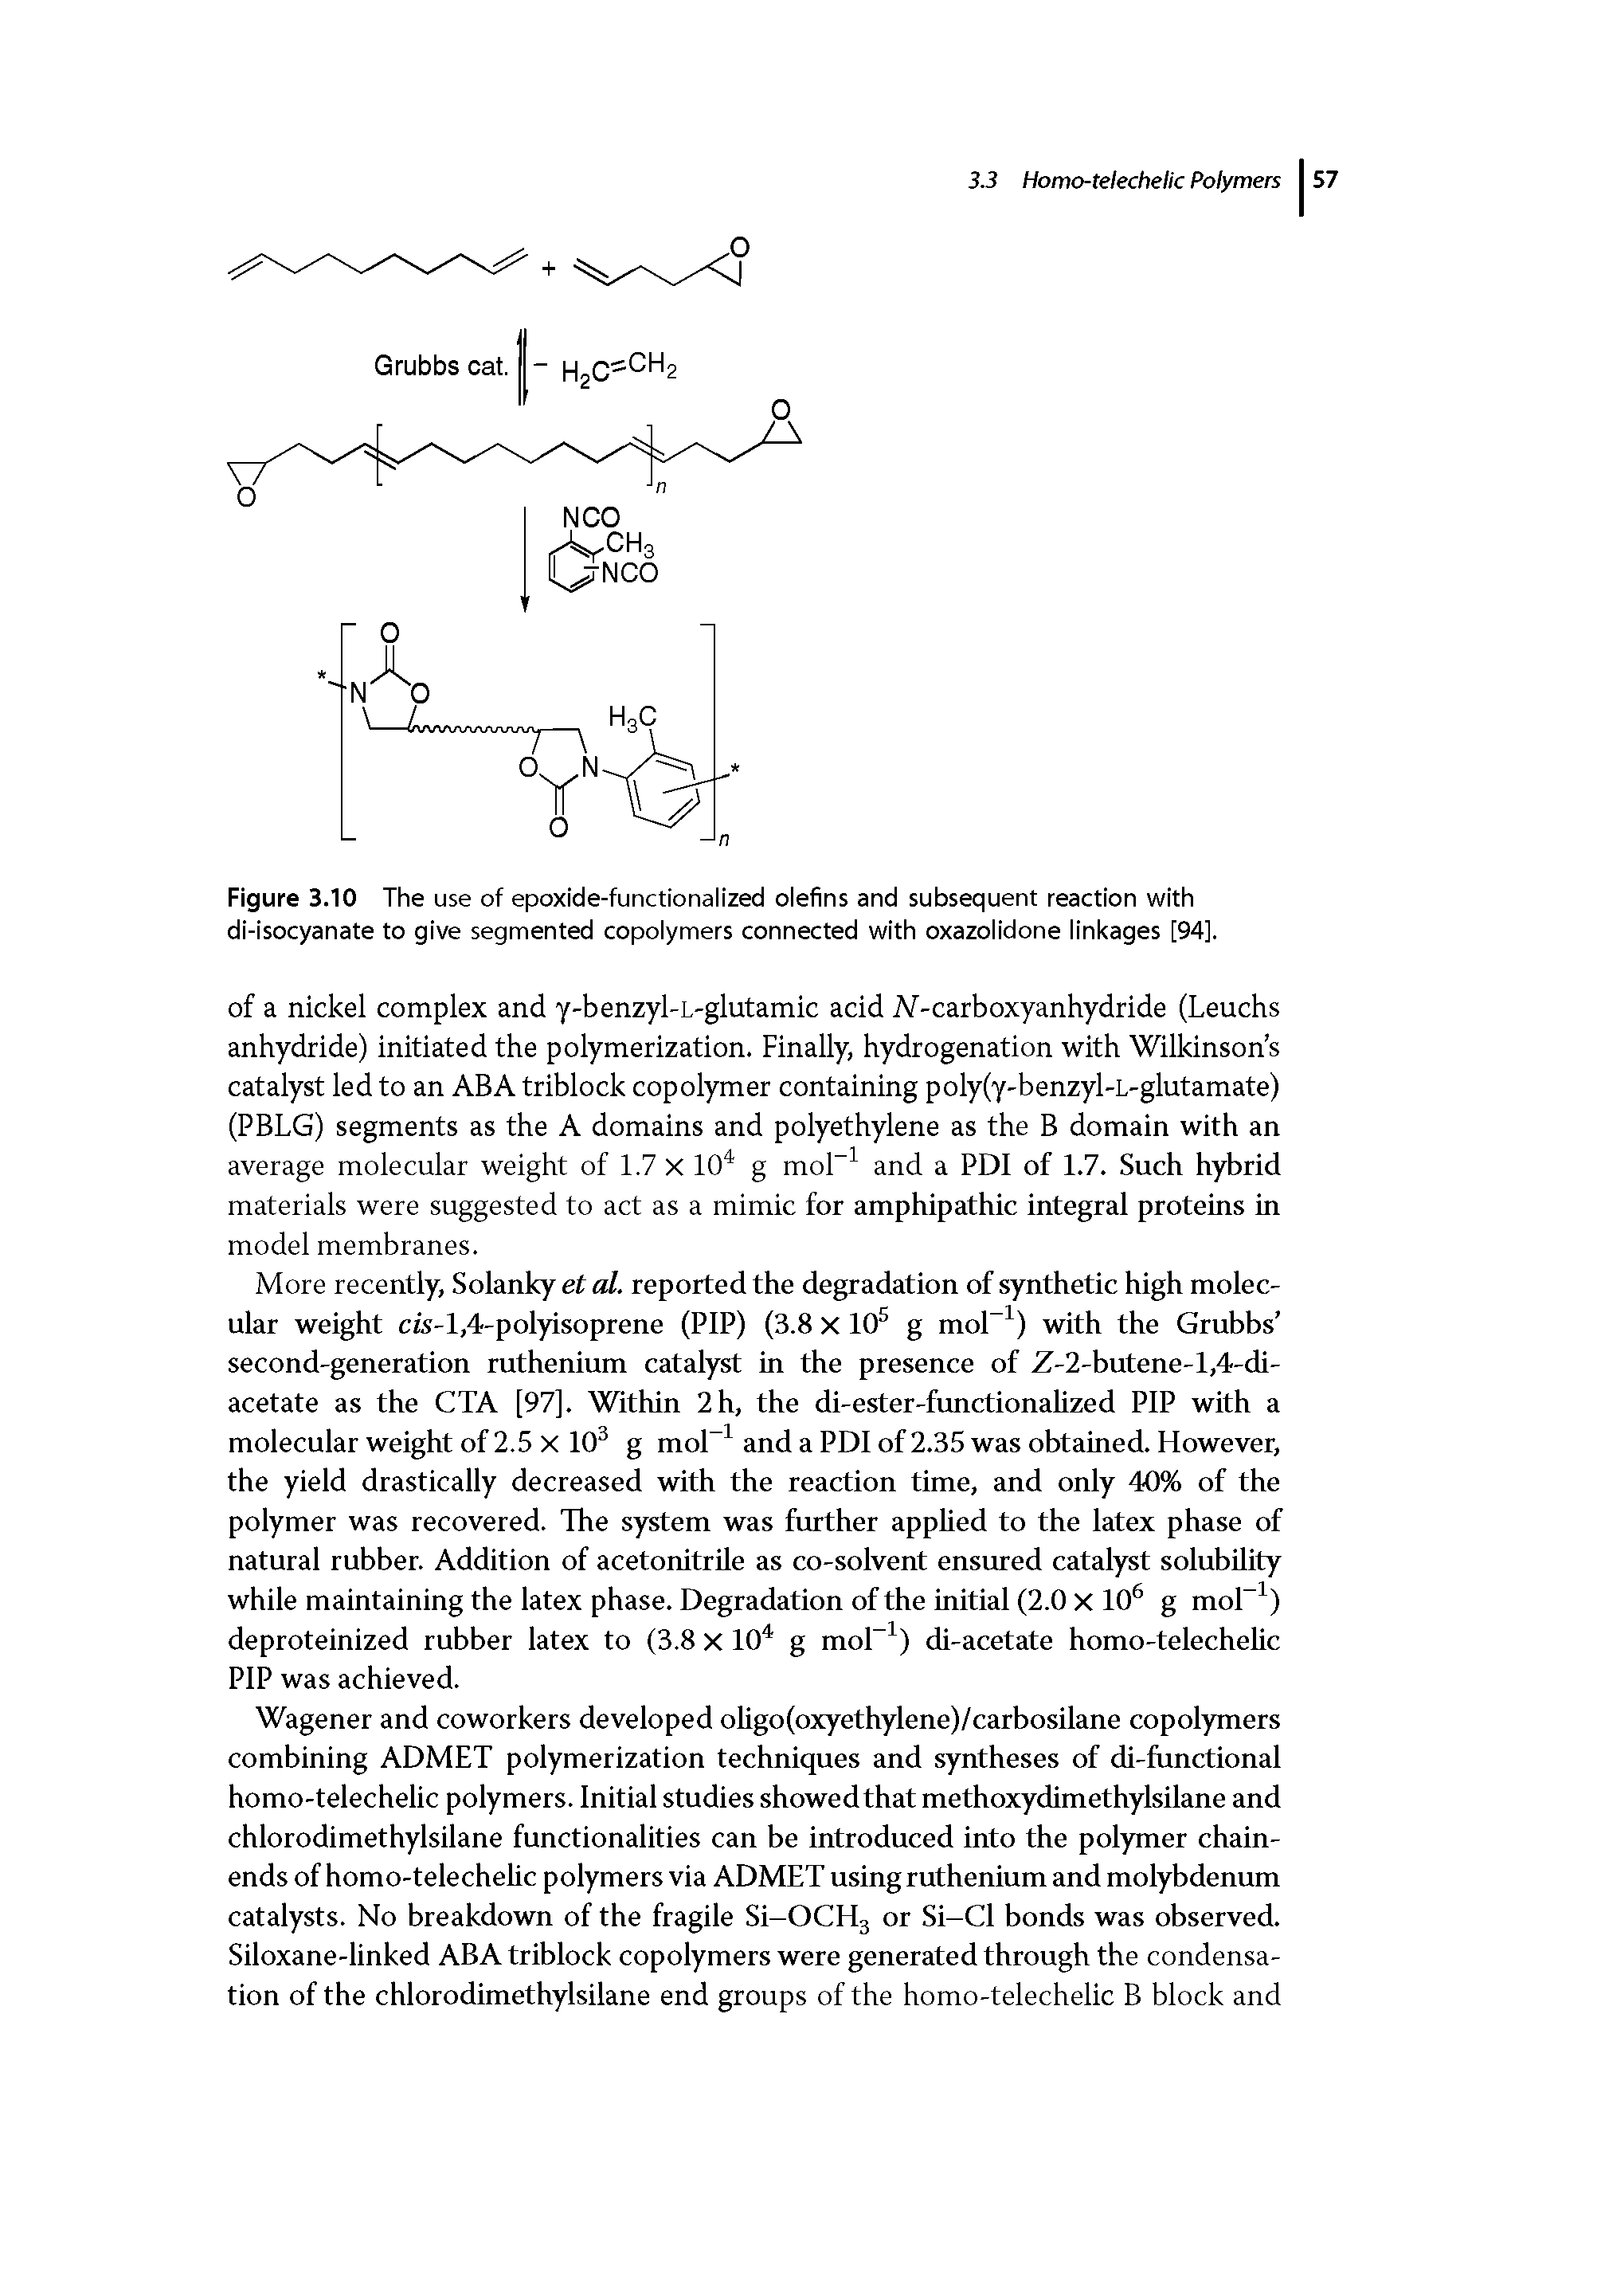 Figure 3.10 The use of epoxide-functionalized olefins and subsequent reaction with di-isocyanate to give segmented copolymers connected with oxazolidone linkages [94].